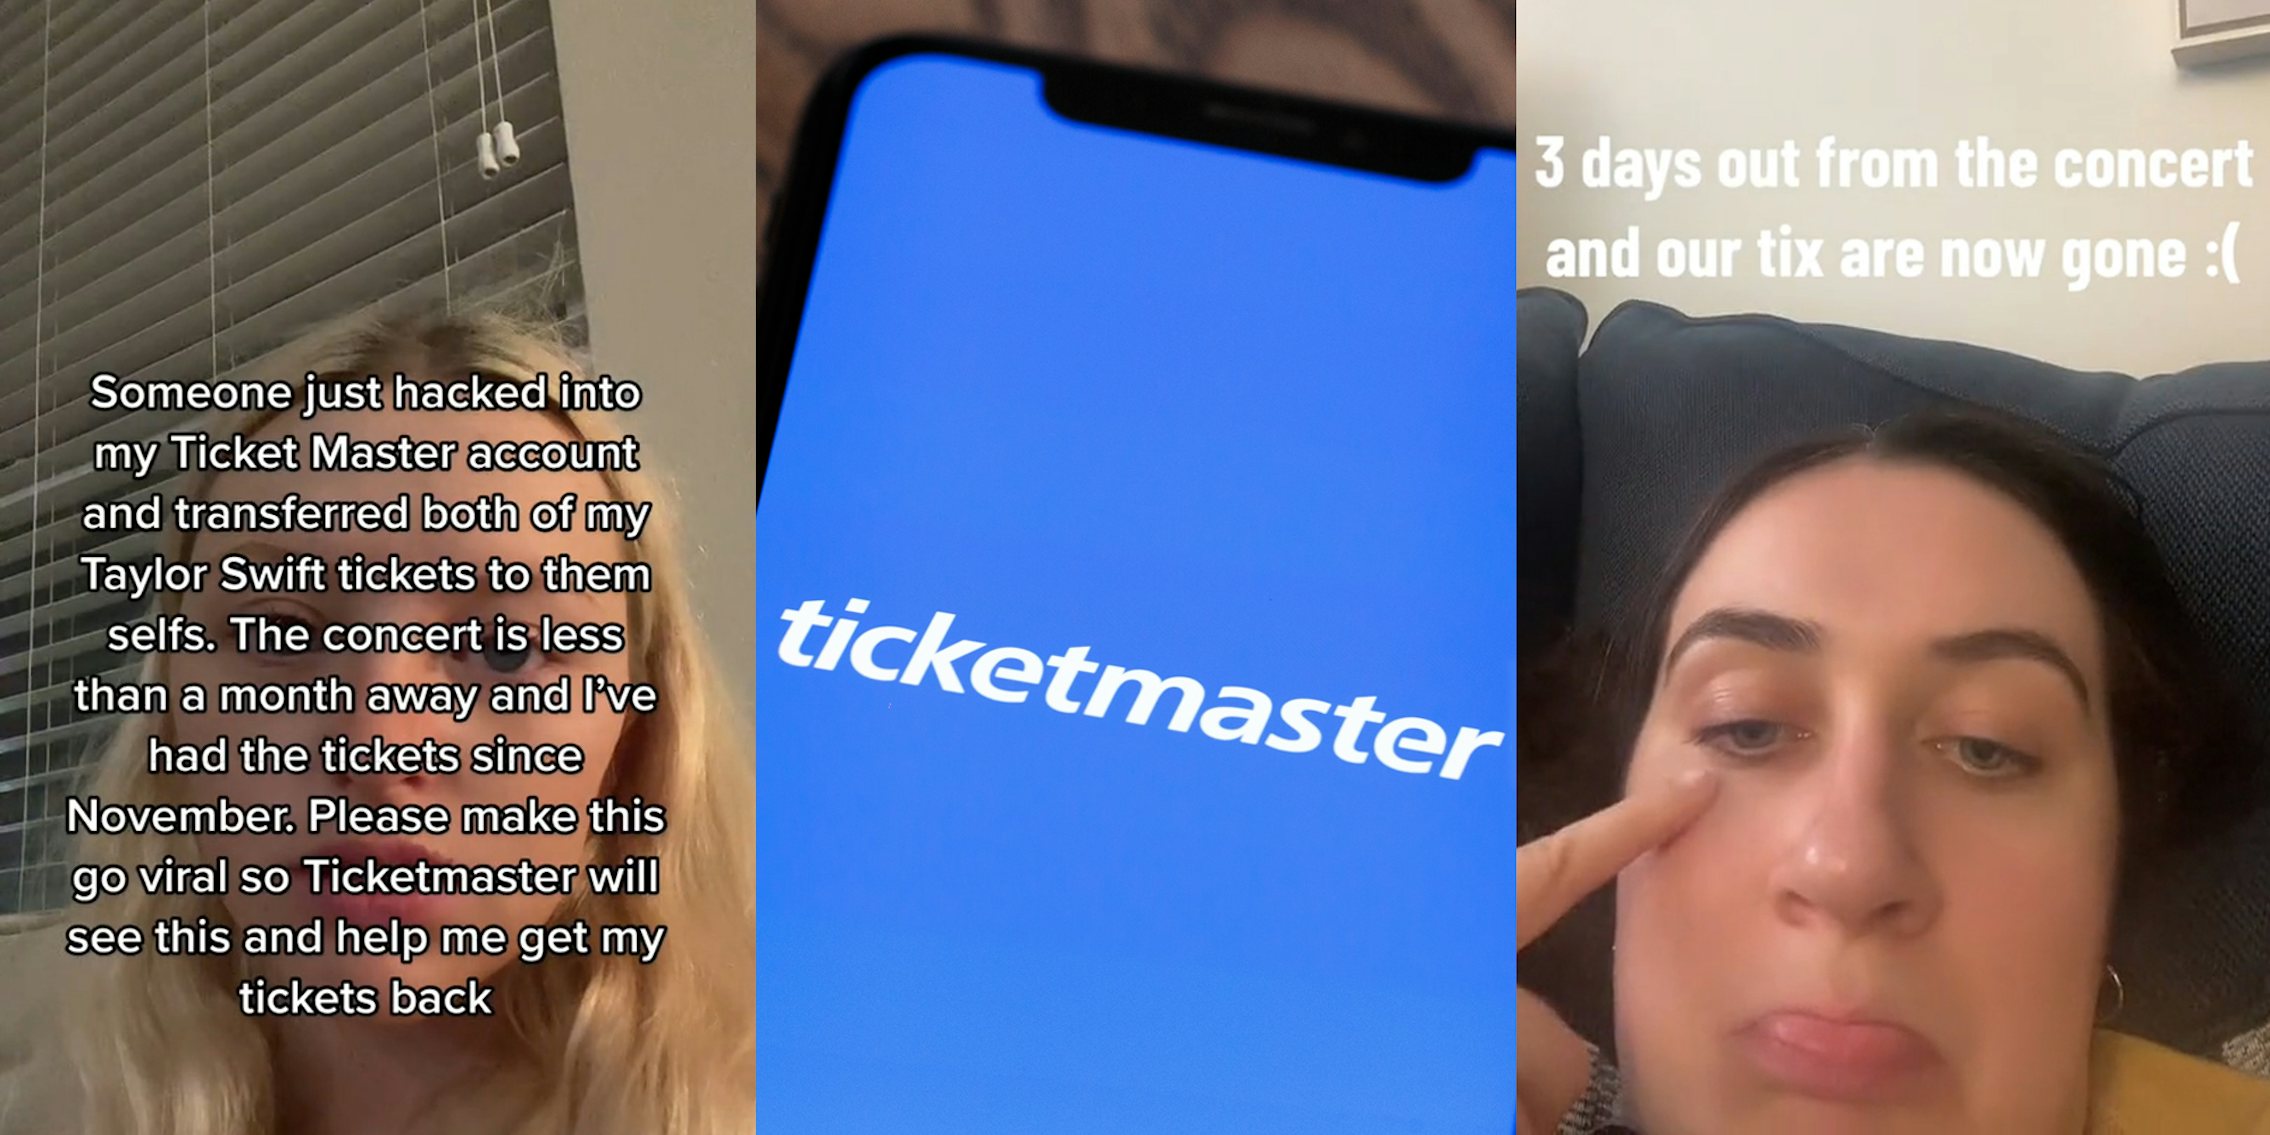 TicketMaster customer with caption 'Someone just hacked into my Ticket Master account and transferred both of my Taylor Swift tickets to them selfs. The concert is less than a month away and I've had the tickets since November. Please make this go viral so Ticketmaster will see this and help me get my tickets back' (l) TicketMaster on phone screen (c) TicketMaster customer with caption '3 days out from the concert and our tix are now gone :(' (r)